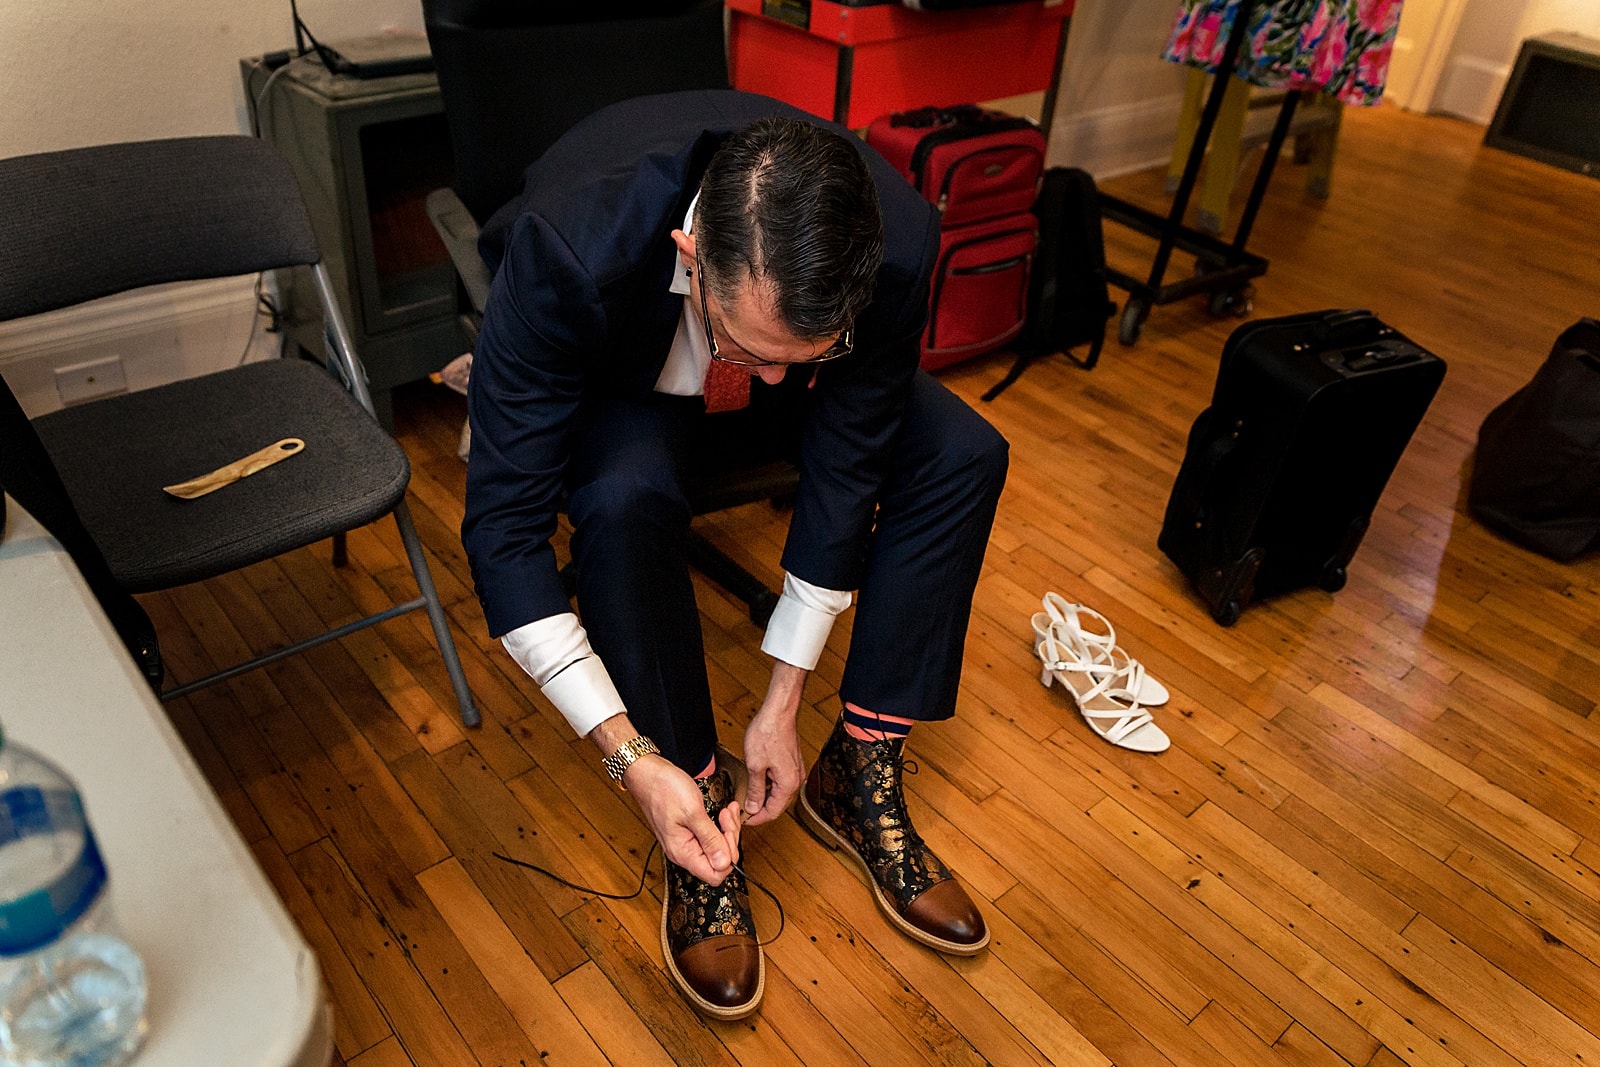 groom style gets overlooked a lot, but grooms should totally rock awesome shoes like these more often